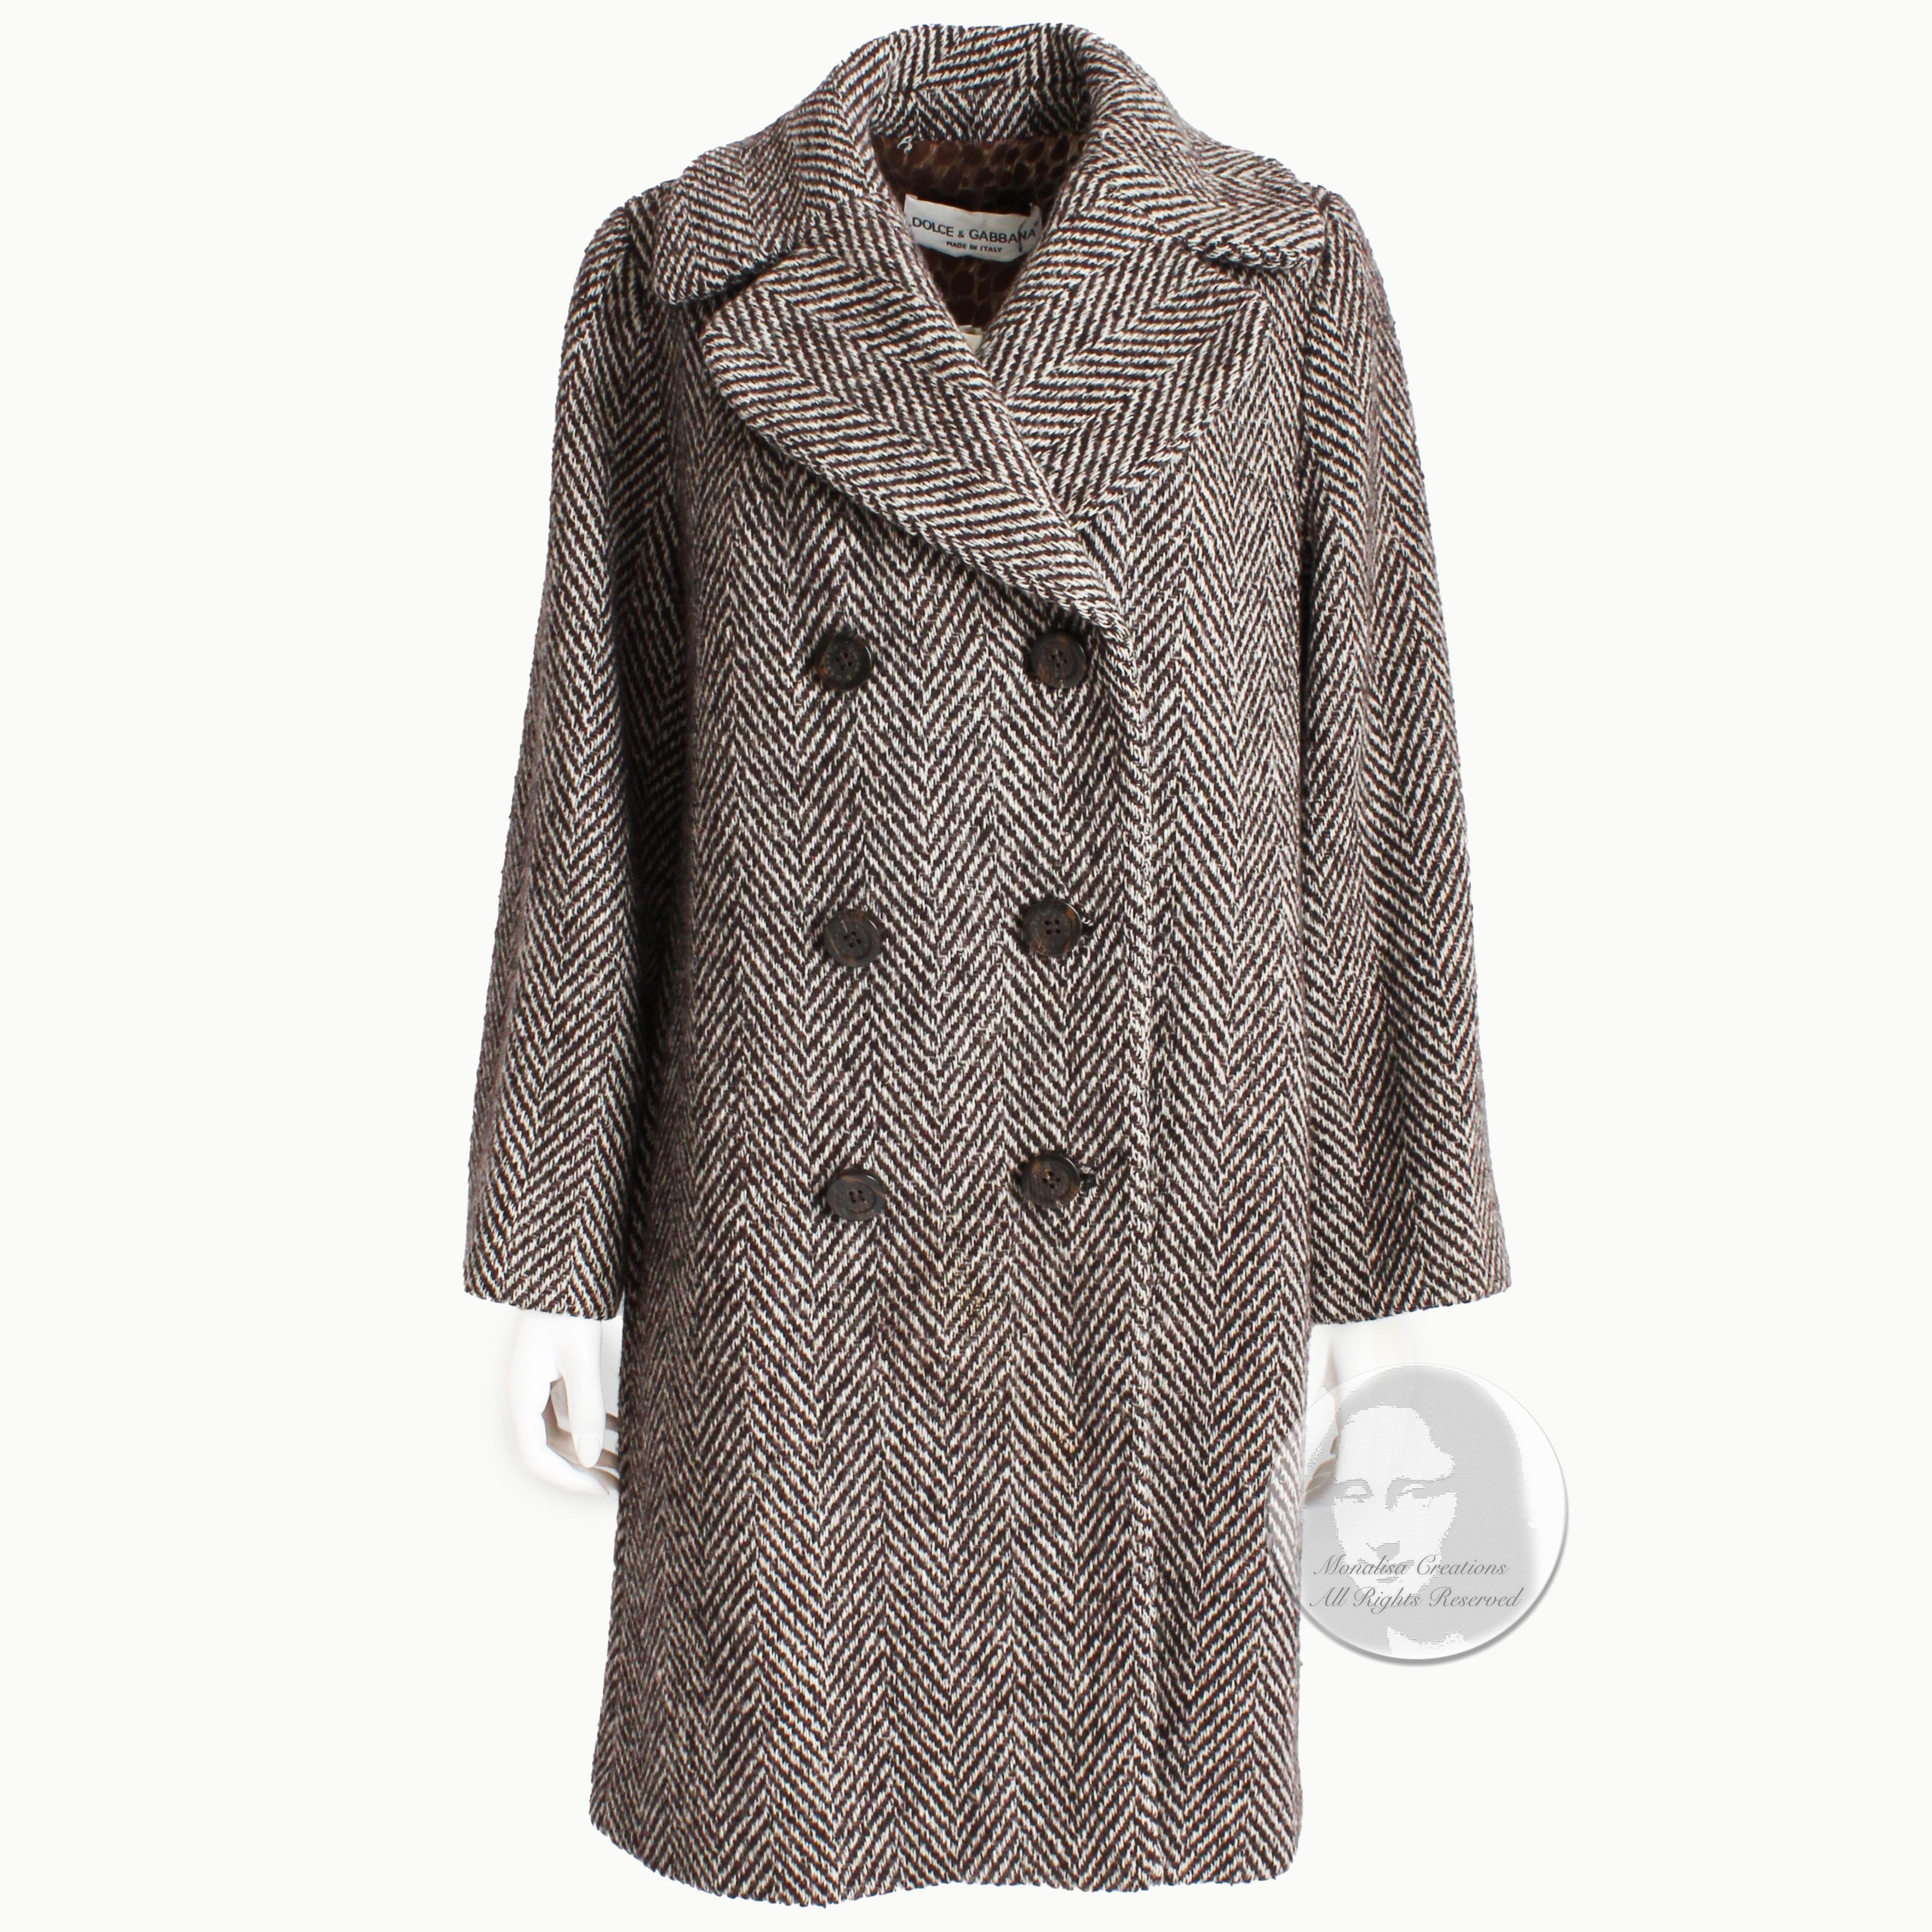 Dolce & Gabbana Wool Coat Classic Herringbone Double Breasted Brown Cream Sz 40 In Good Condition For Sale In Port Saint Lucie, FL